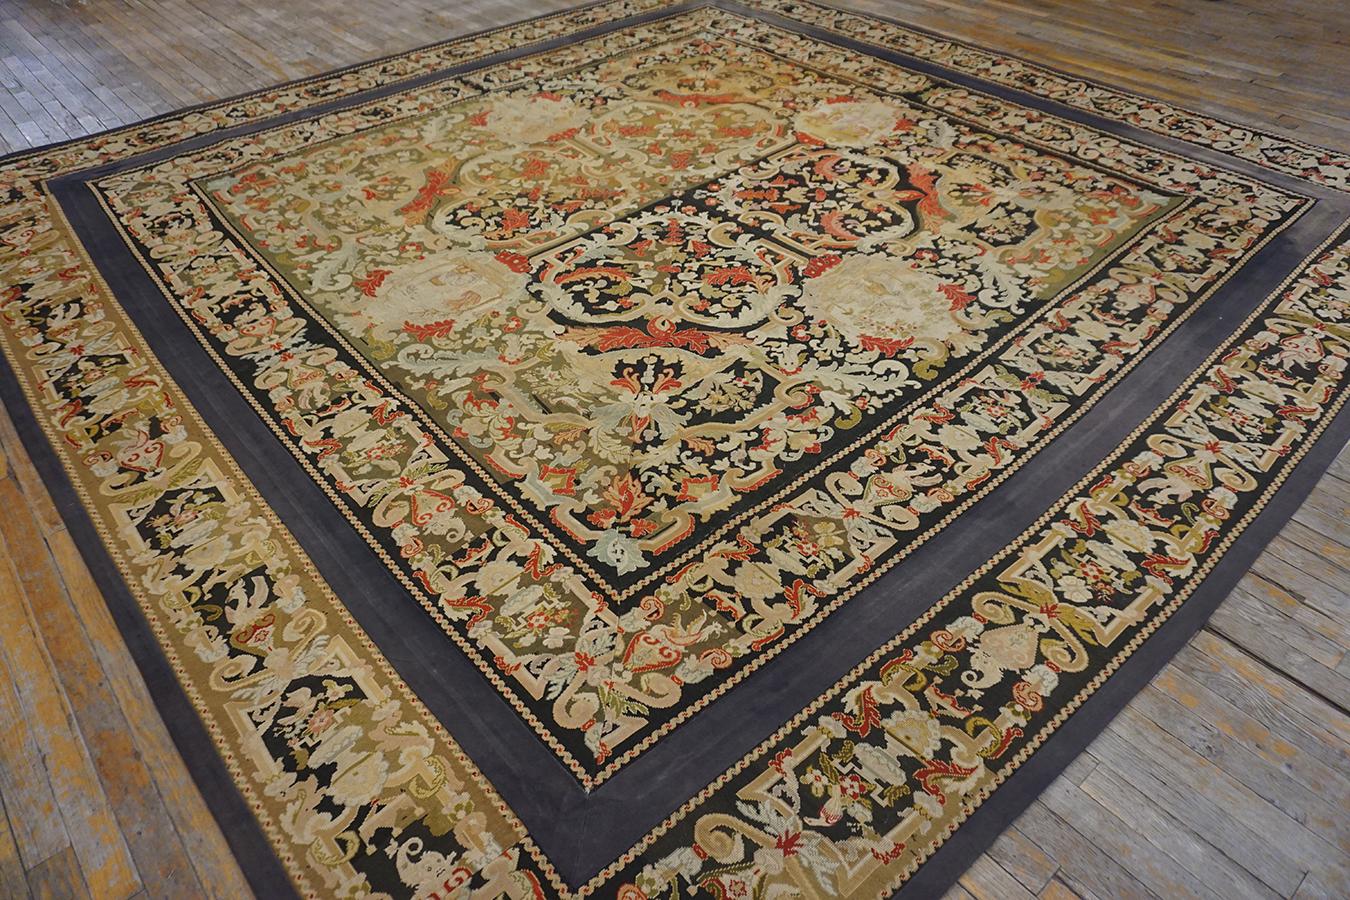 19th Century French Needlepoint Carpet ( 11' x 11' - 335 x 335 ) In Good Condition For Sale In New York, NY